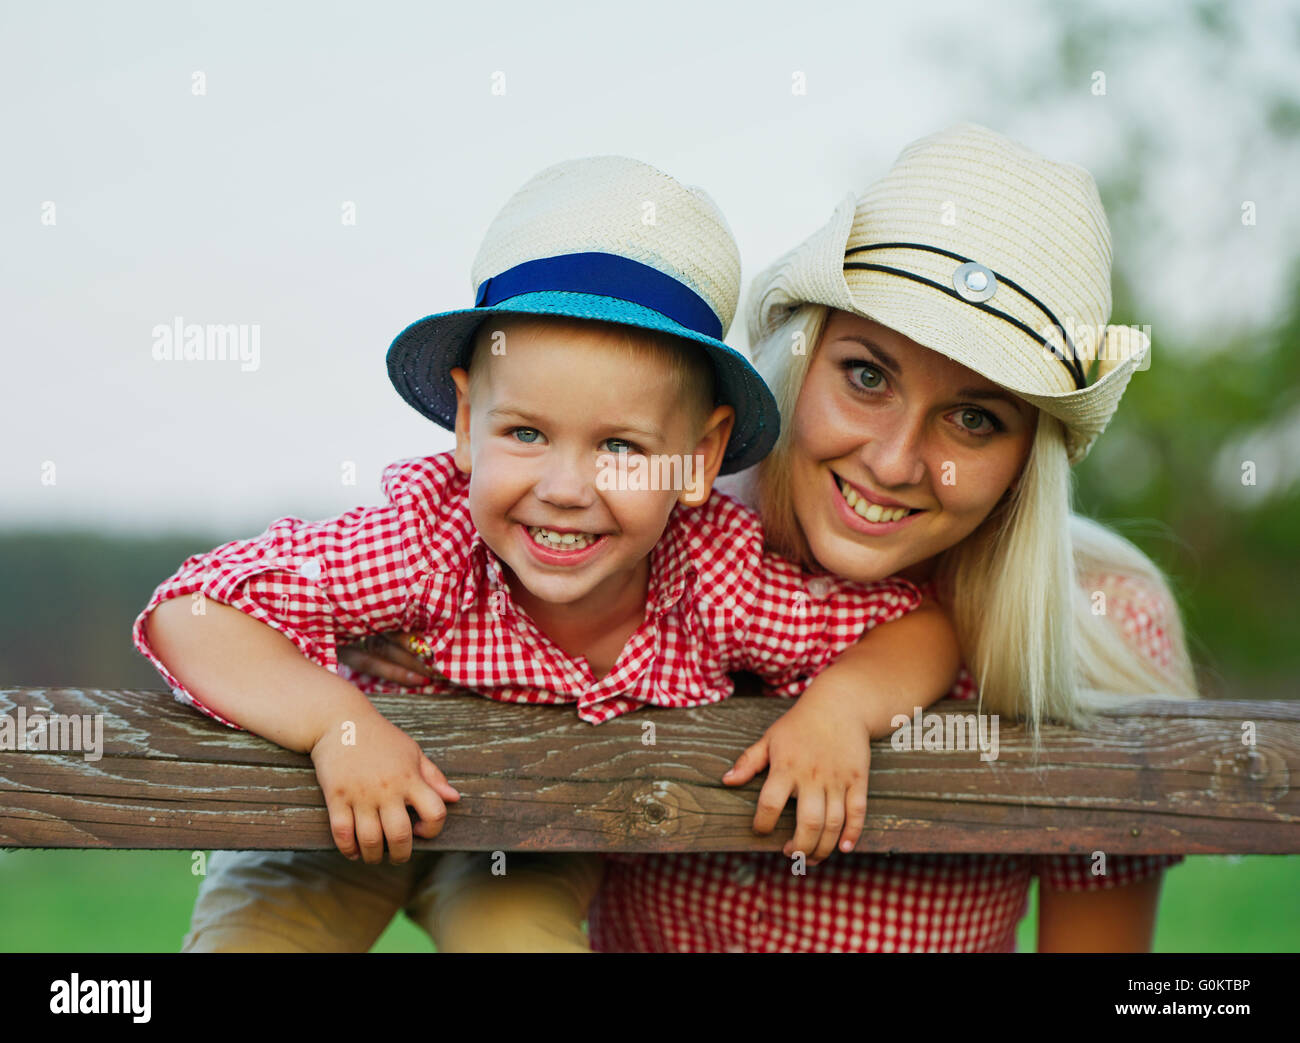 happy family in country style Stock Photo